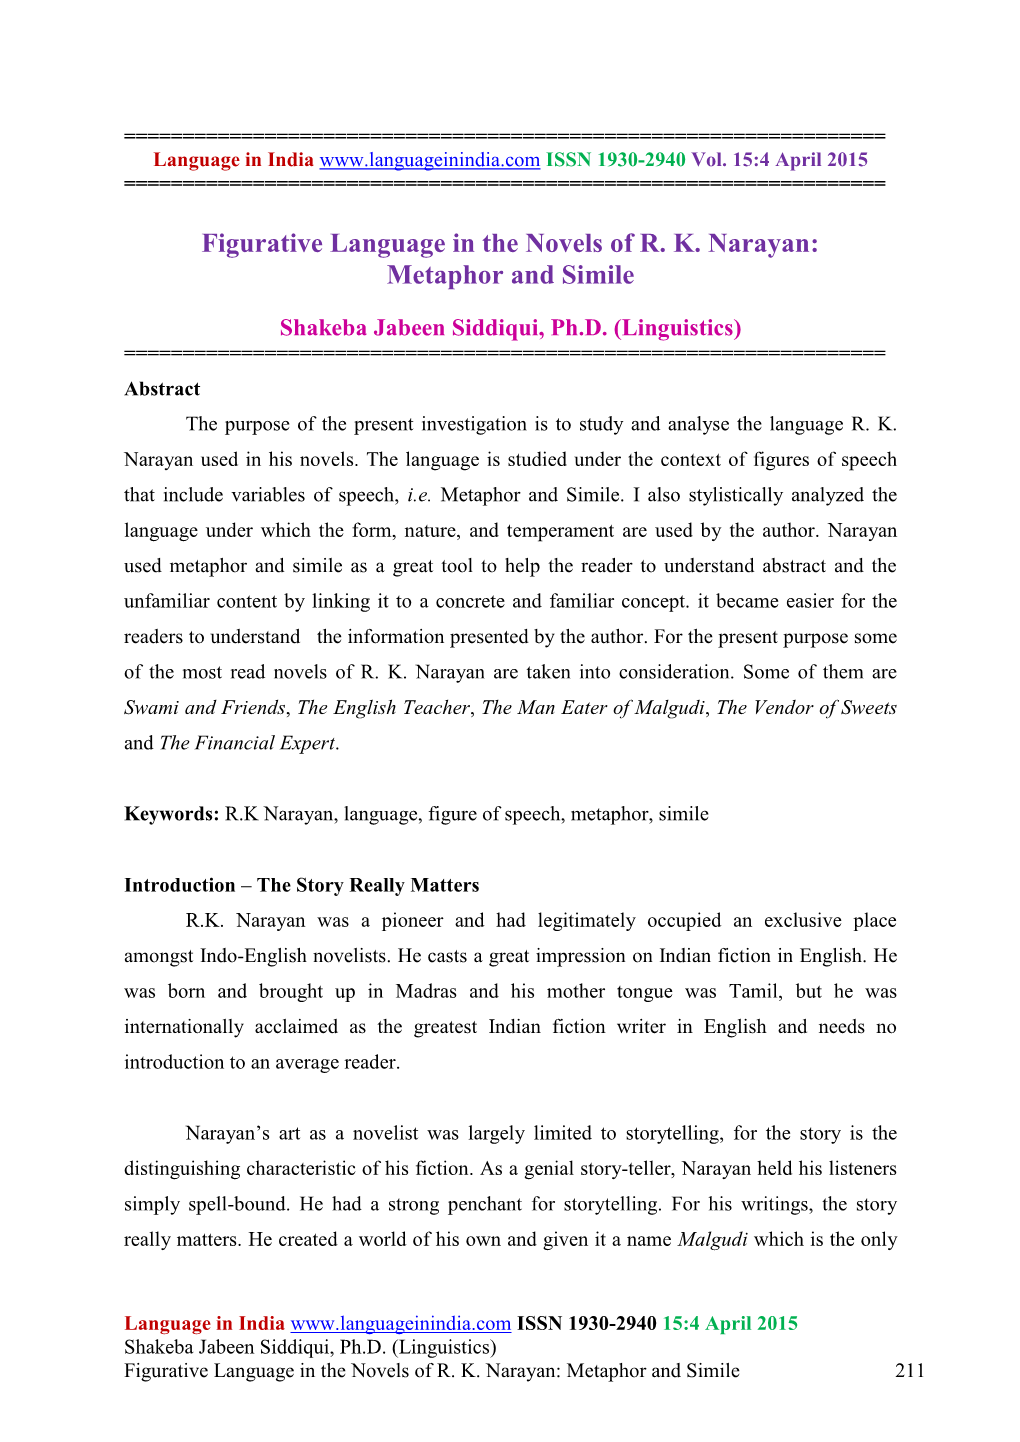 Figurative Language in the Novels of R. K. Narayan: Metaphor and Simile